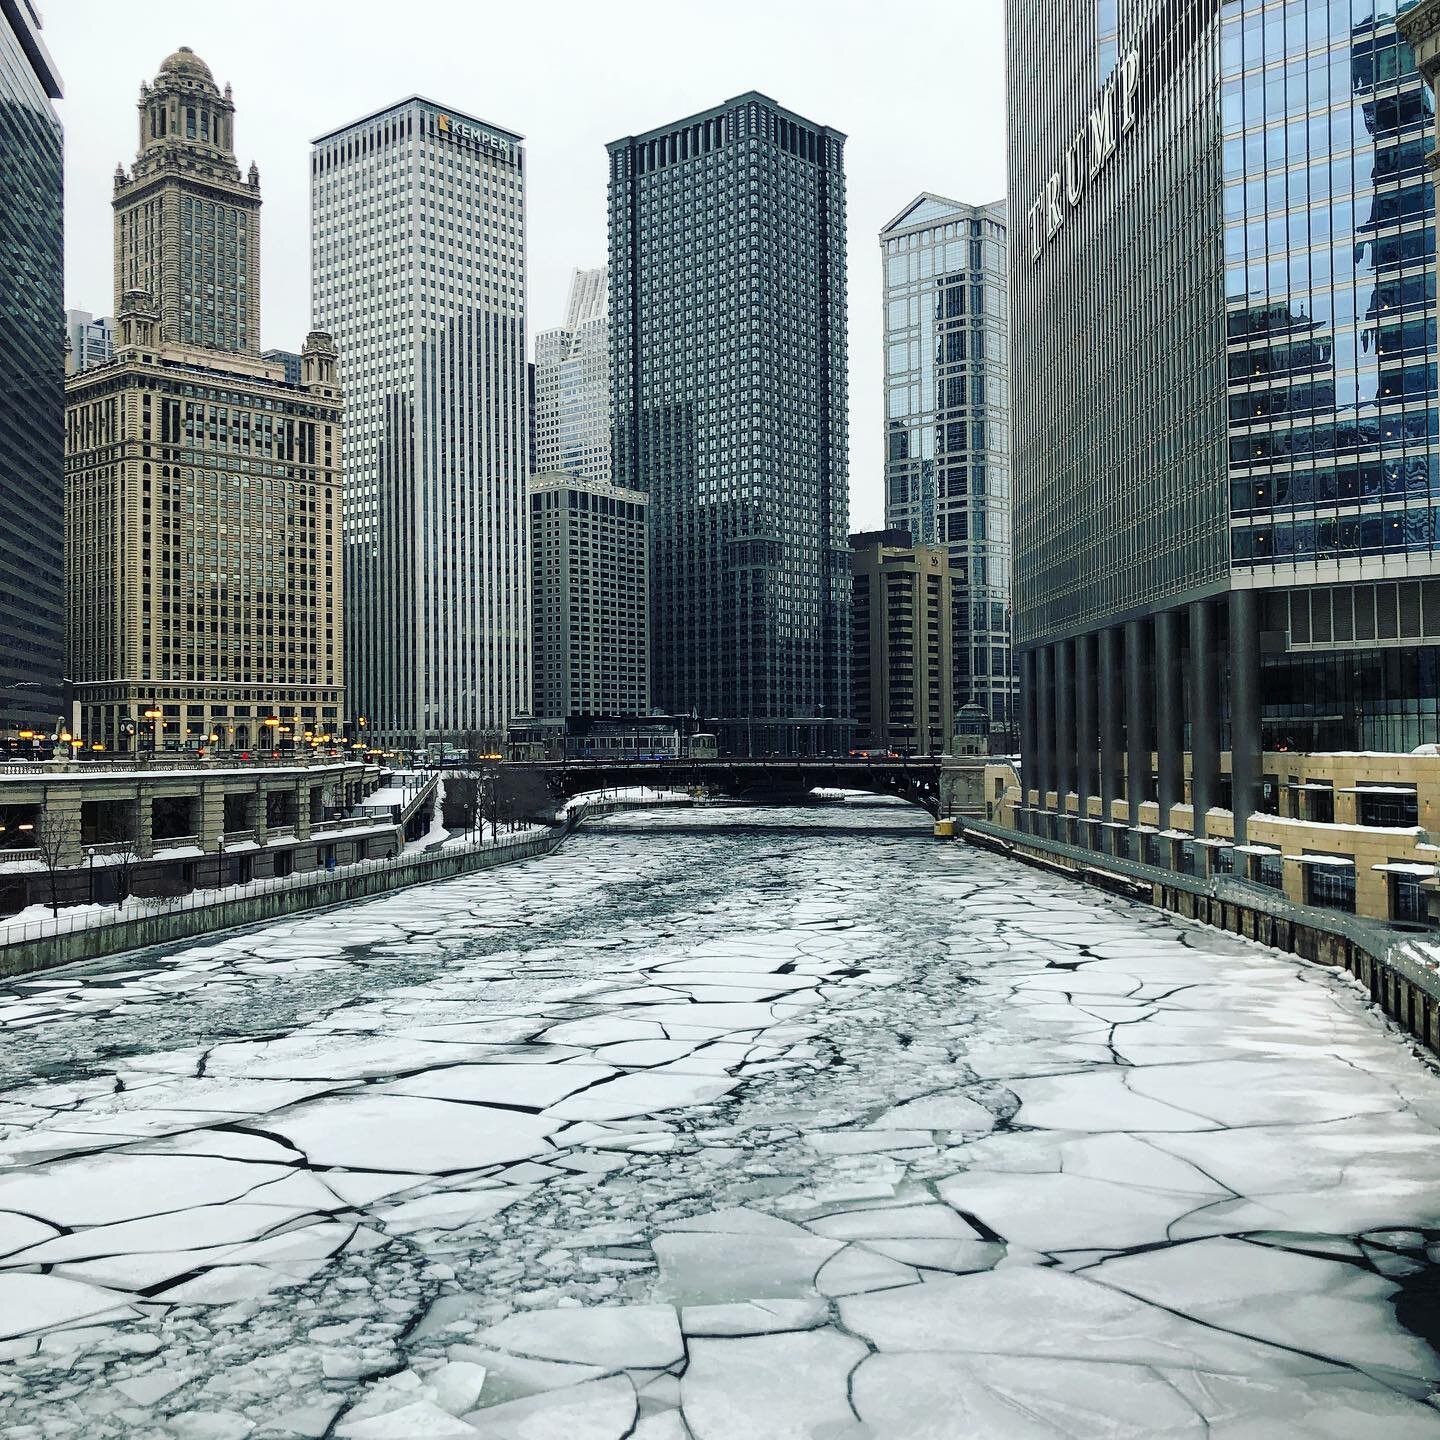 Even in the winter, Chicago is beautiful. 
&bull;
&bull;
&bull;
#chicagoriver #chicagoriverwalk #chicagorivernorth #chicagowinter #chicago #skyline #architecture